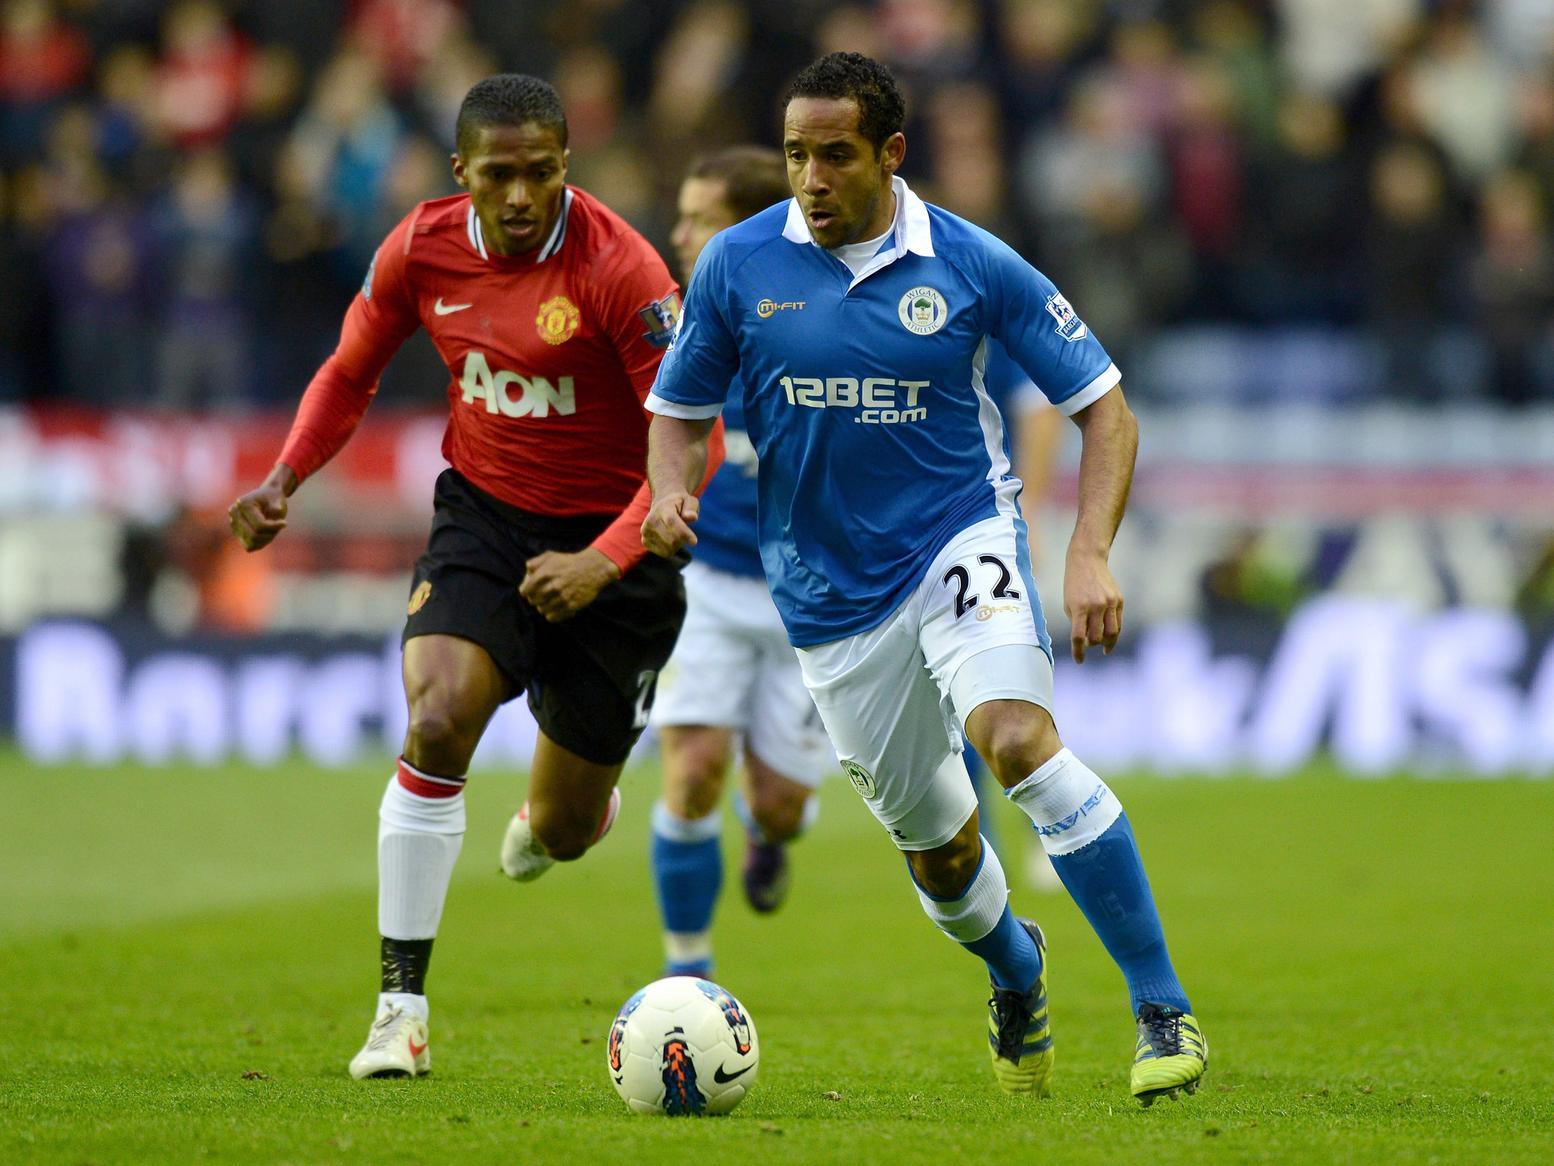 LEFT-BACK: JEAN BEAUSEJOUR- His arrival in January 2012 - whichgave the green light forRoberto Martinez's 3-4-3 formation - coincided with Latics going from relegation probables to the most in-form side in the country, with seven wins from their last nine matches securing what had looked an unlikely safety. Outstanding delivery.